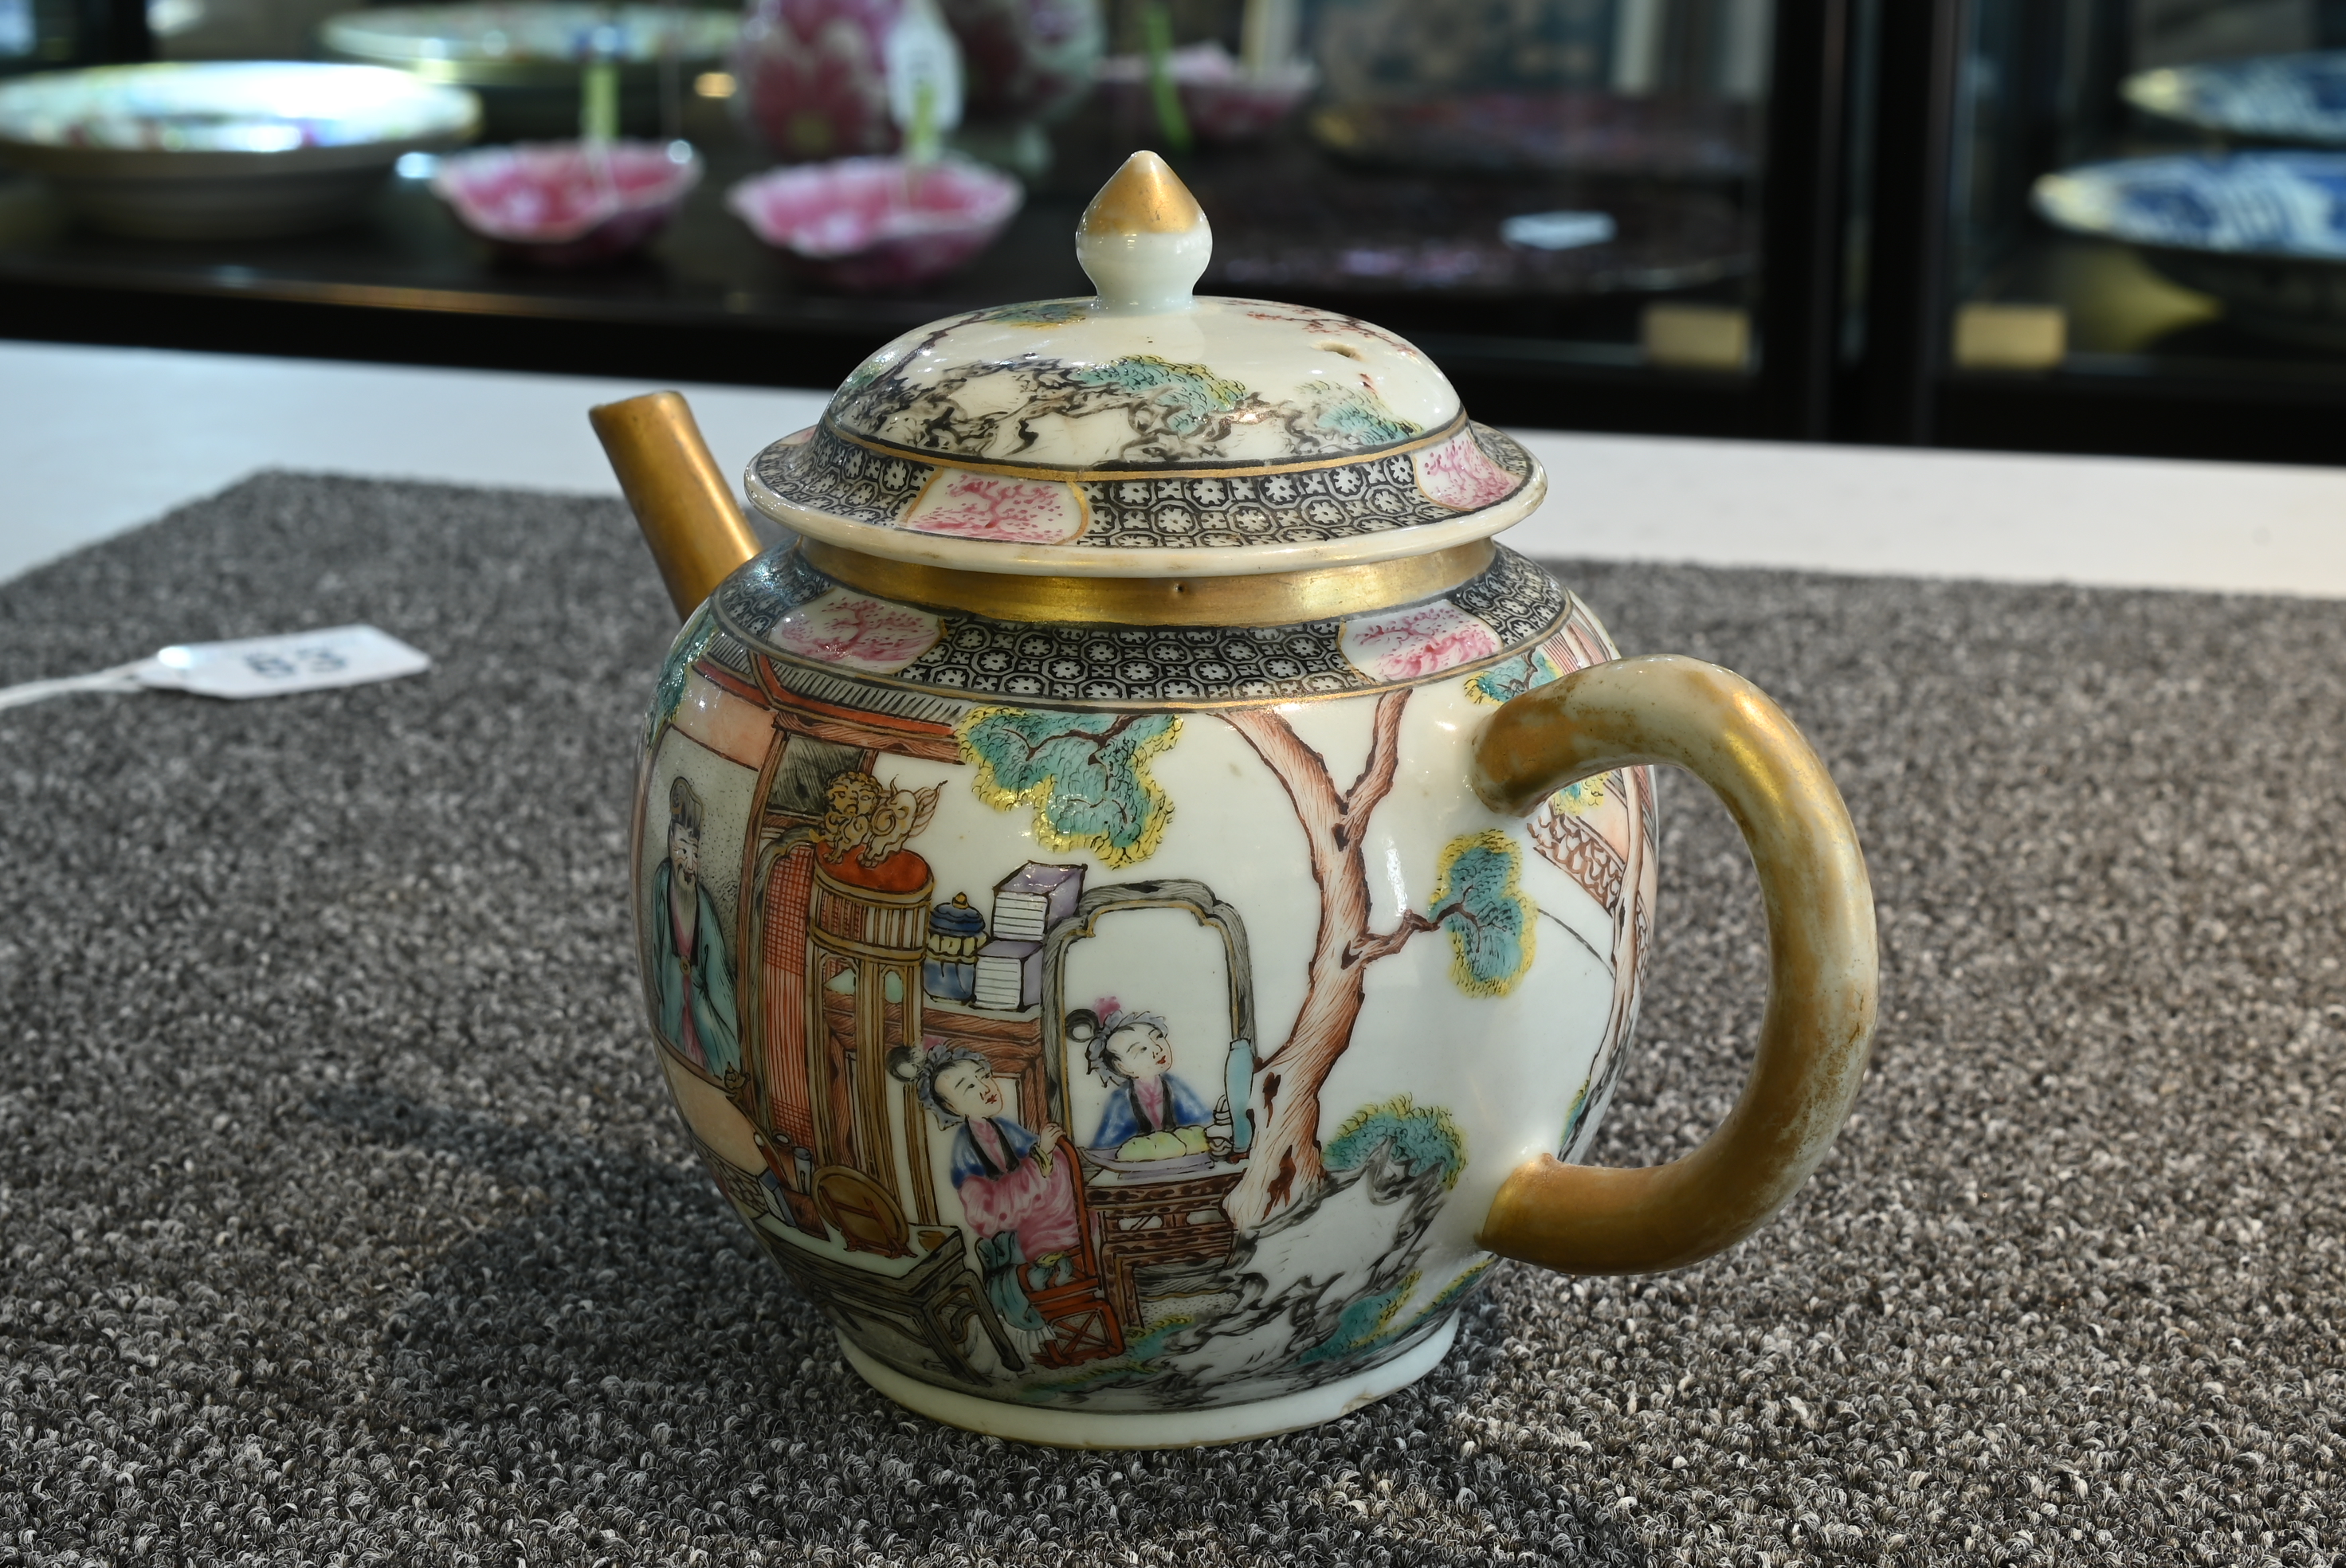 A FINE CHINESE FAMILLE ROSE PORCELAIN TEAPOT, 18TH CENTURY - Image 9 of 21